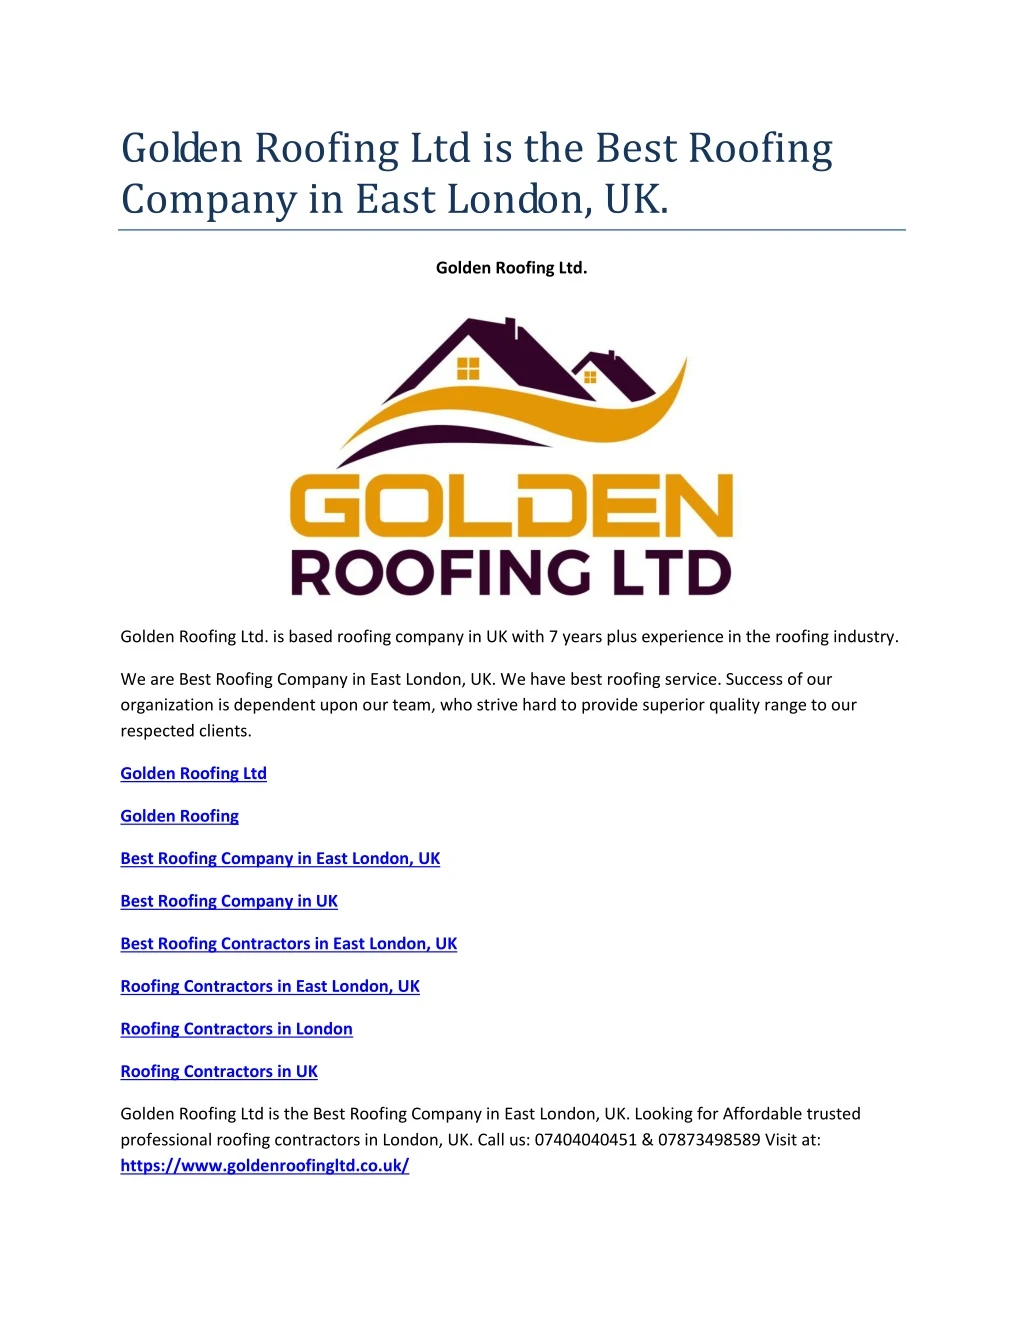 golden roofing ltd is the best roofing company